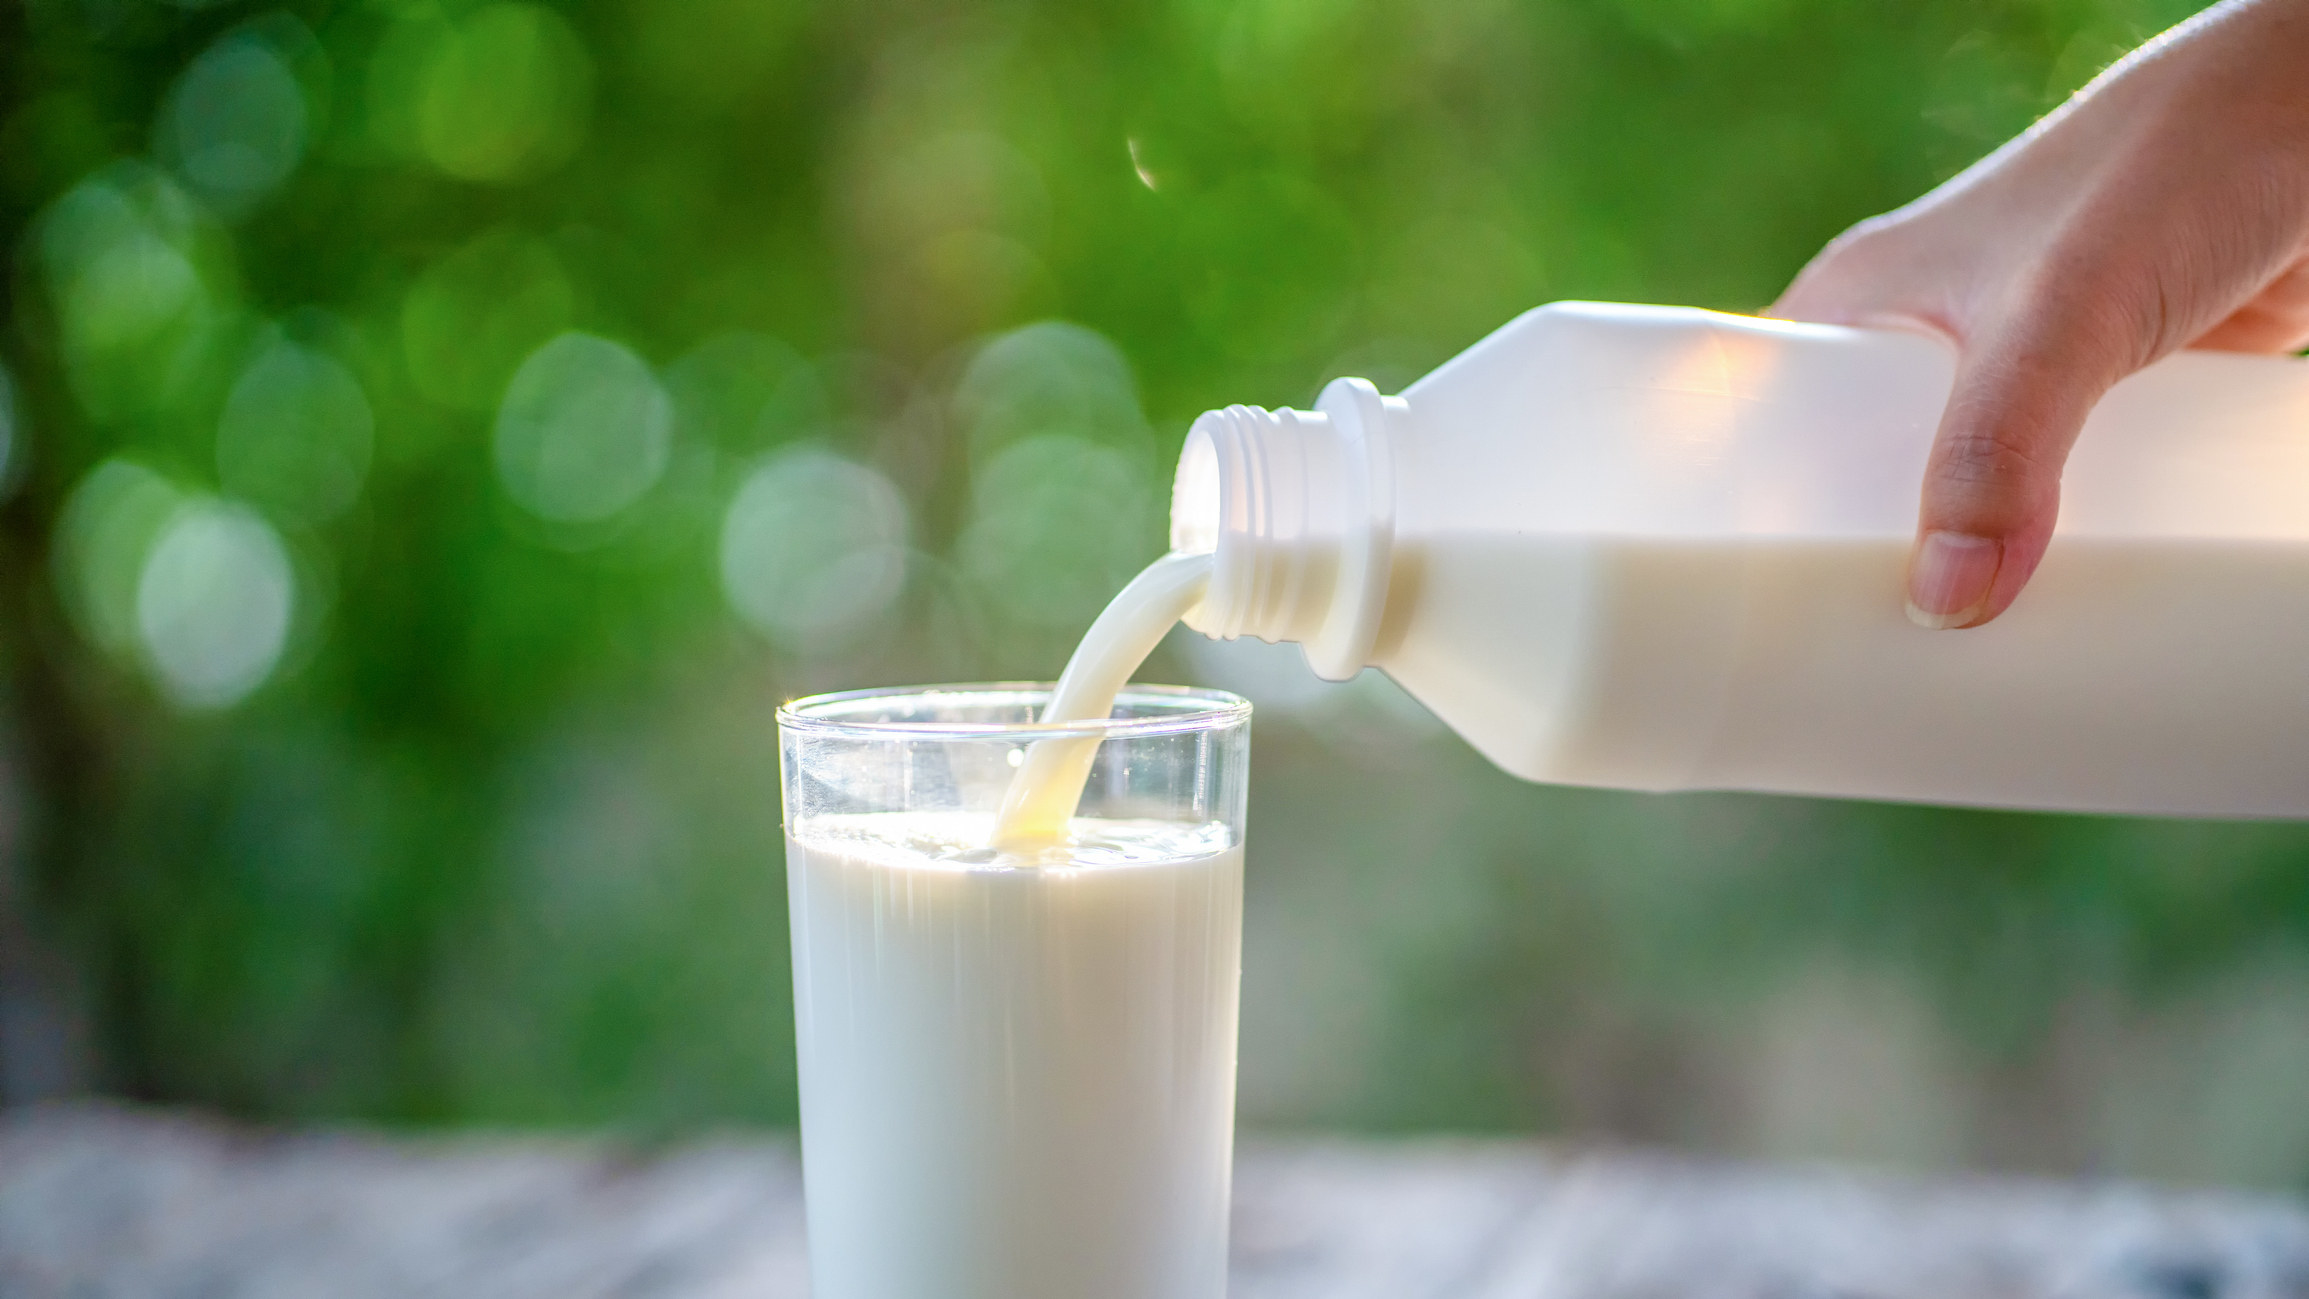 Milk being poured out of a narrow plastic jug into a glass; greenery in the background